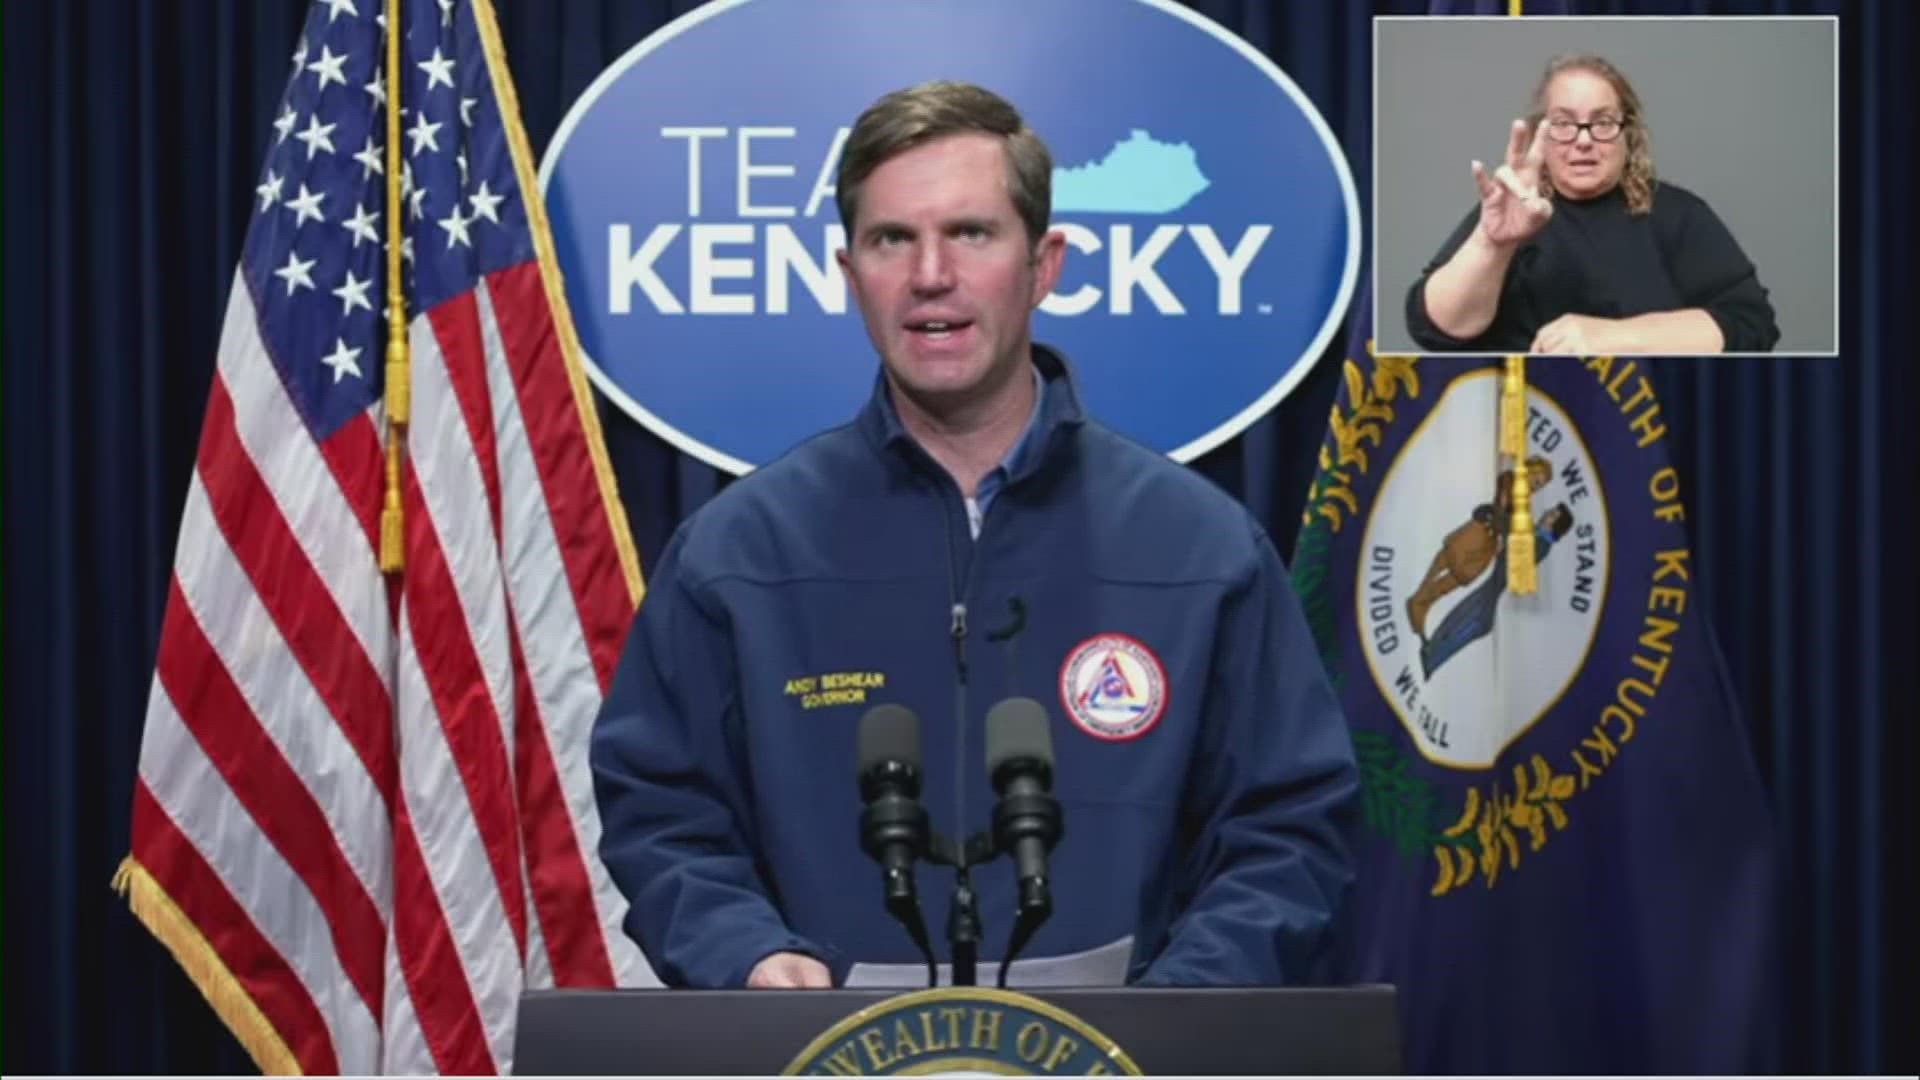 Andy Beshear said despite the devastating tornadoes that have ravaged the area, COVID-19 cases are still on the rise in the commonwealth.